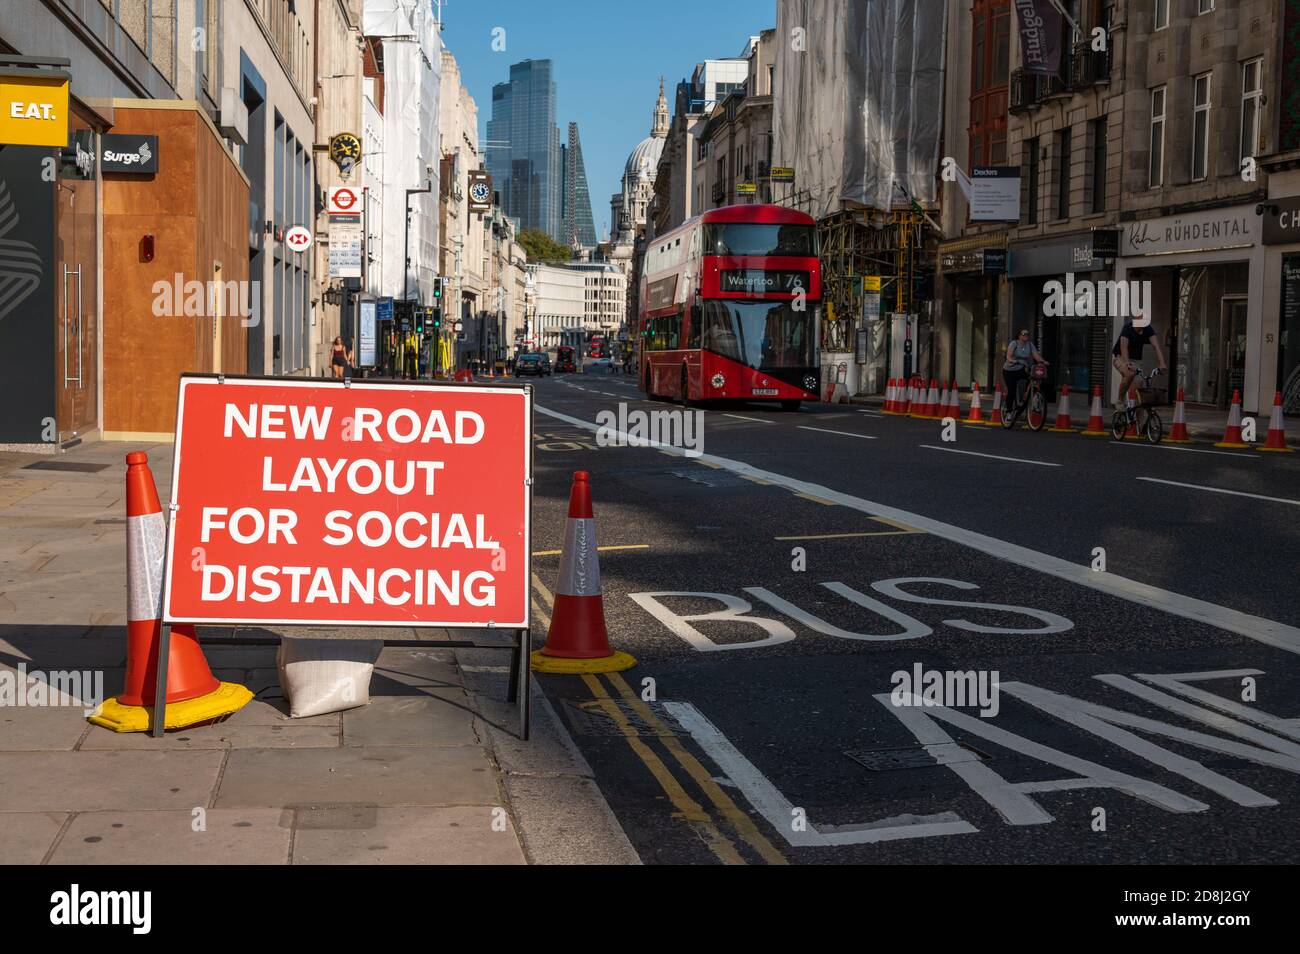 LONDON - SEPTEMBER 13, 2020: Social Distancing new road layout sign with London Double Decker Bus and St Paul's Cathedral in the background during Cov Stock Photo